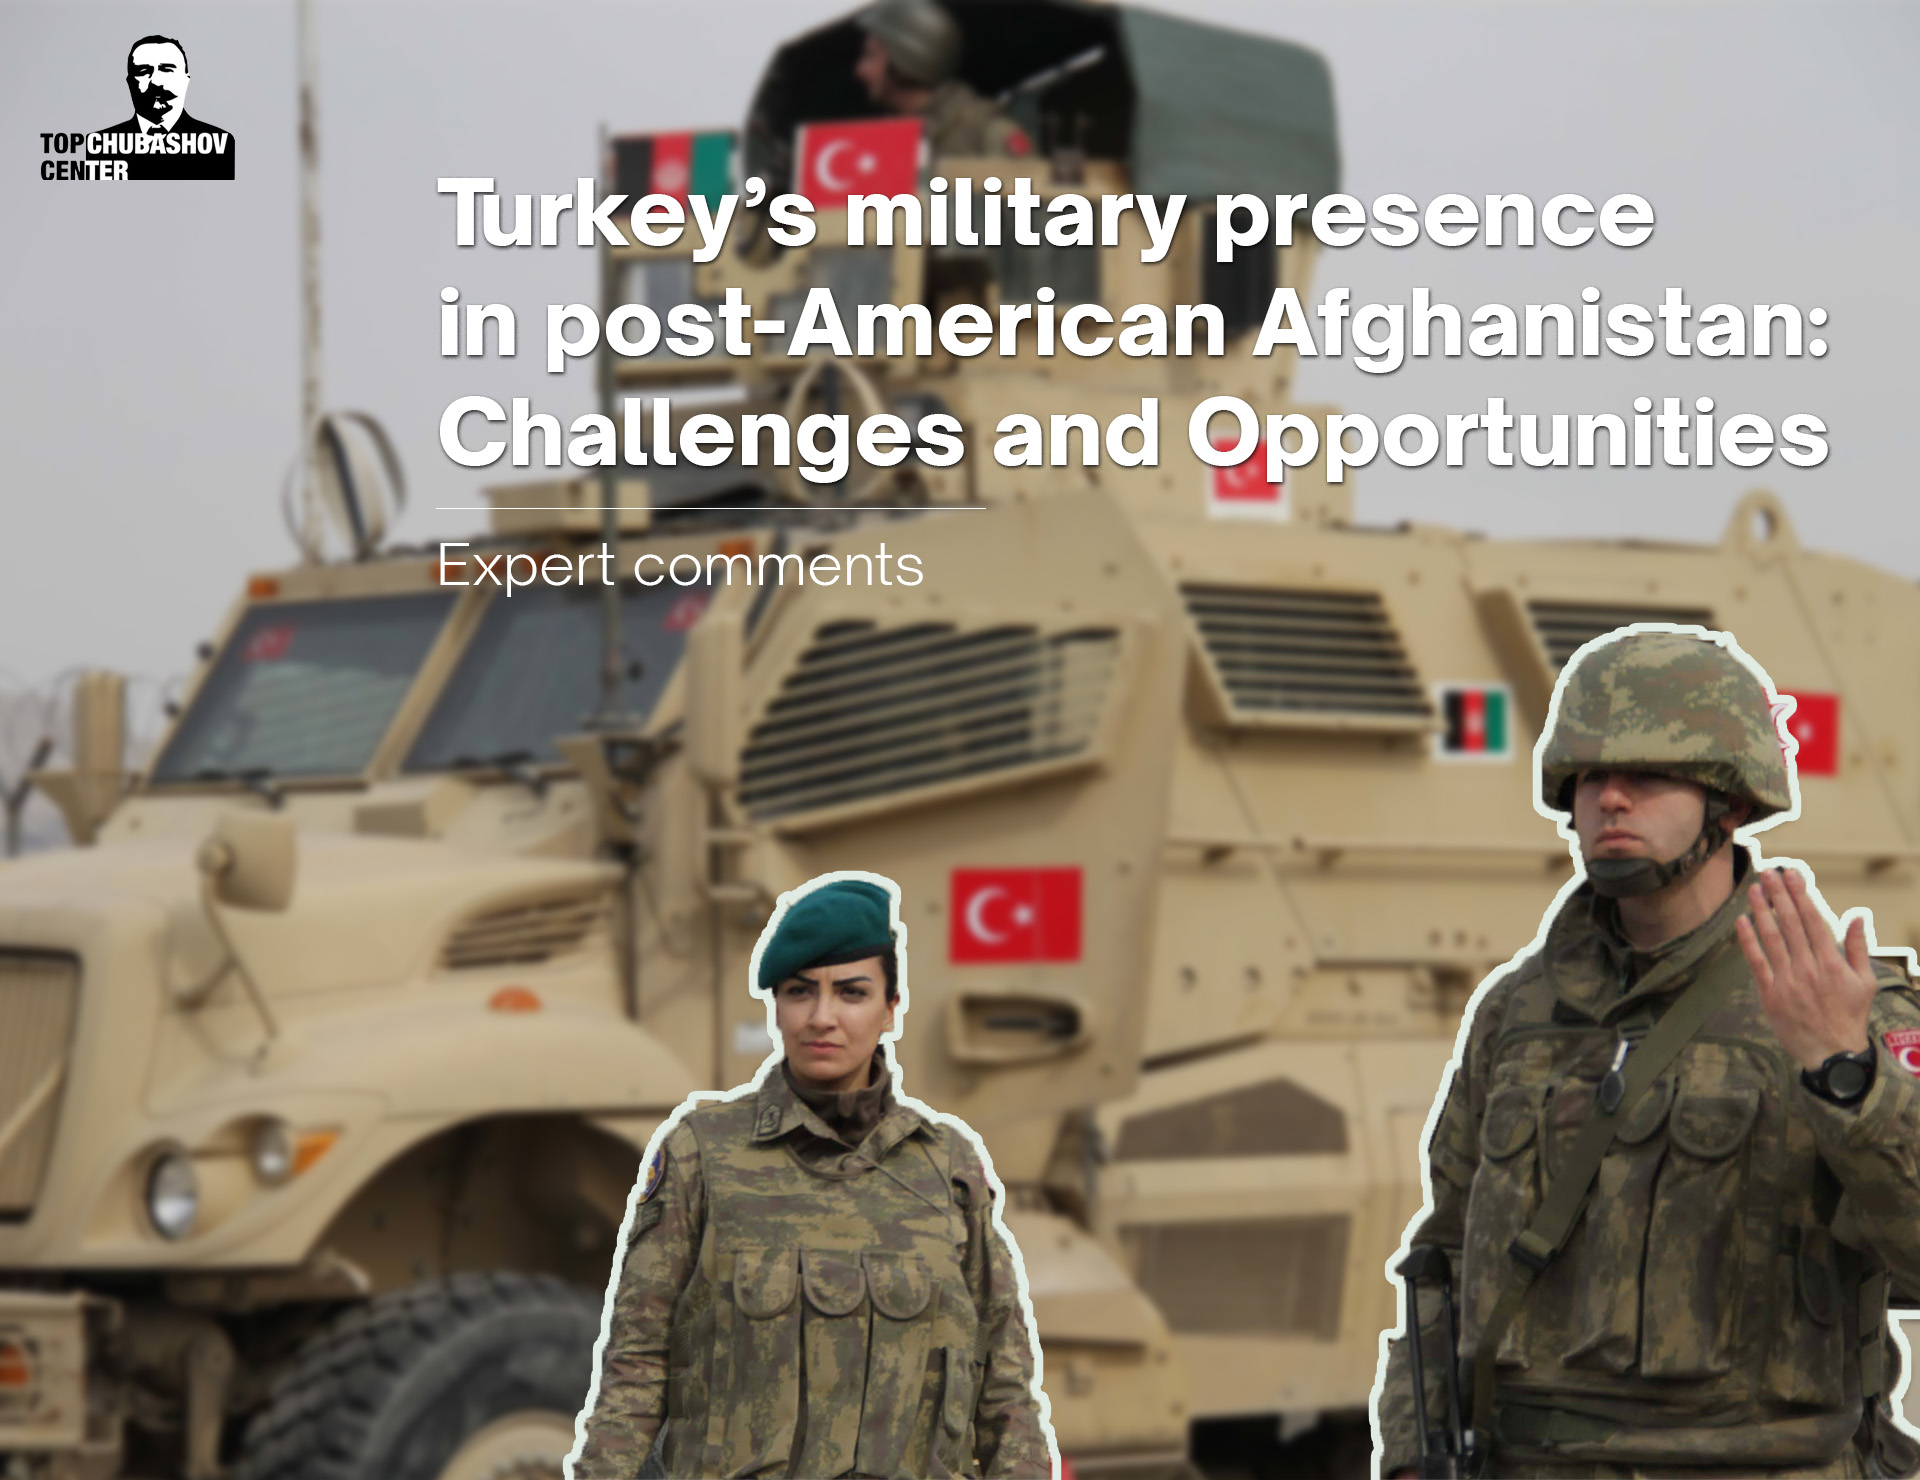 Turkey’s military presence in post-American Afghanistan: Challenges and Opportunities